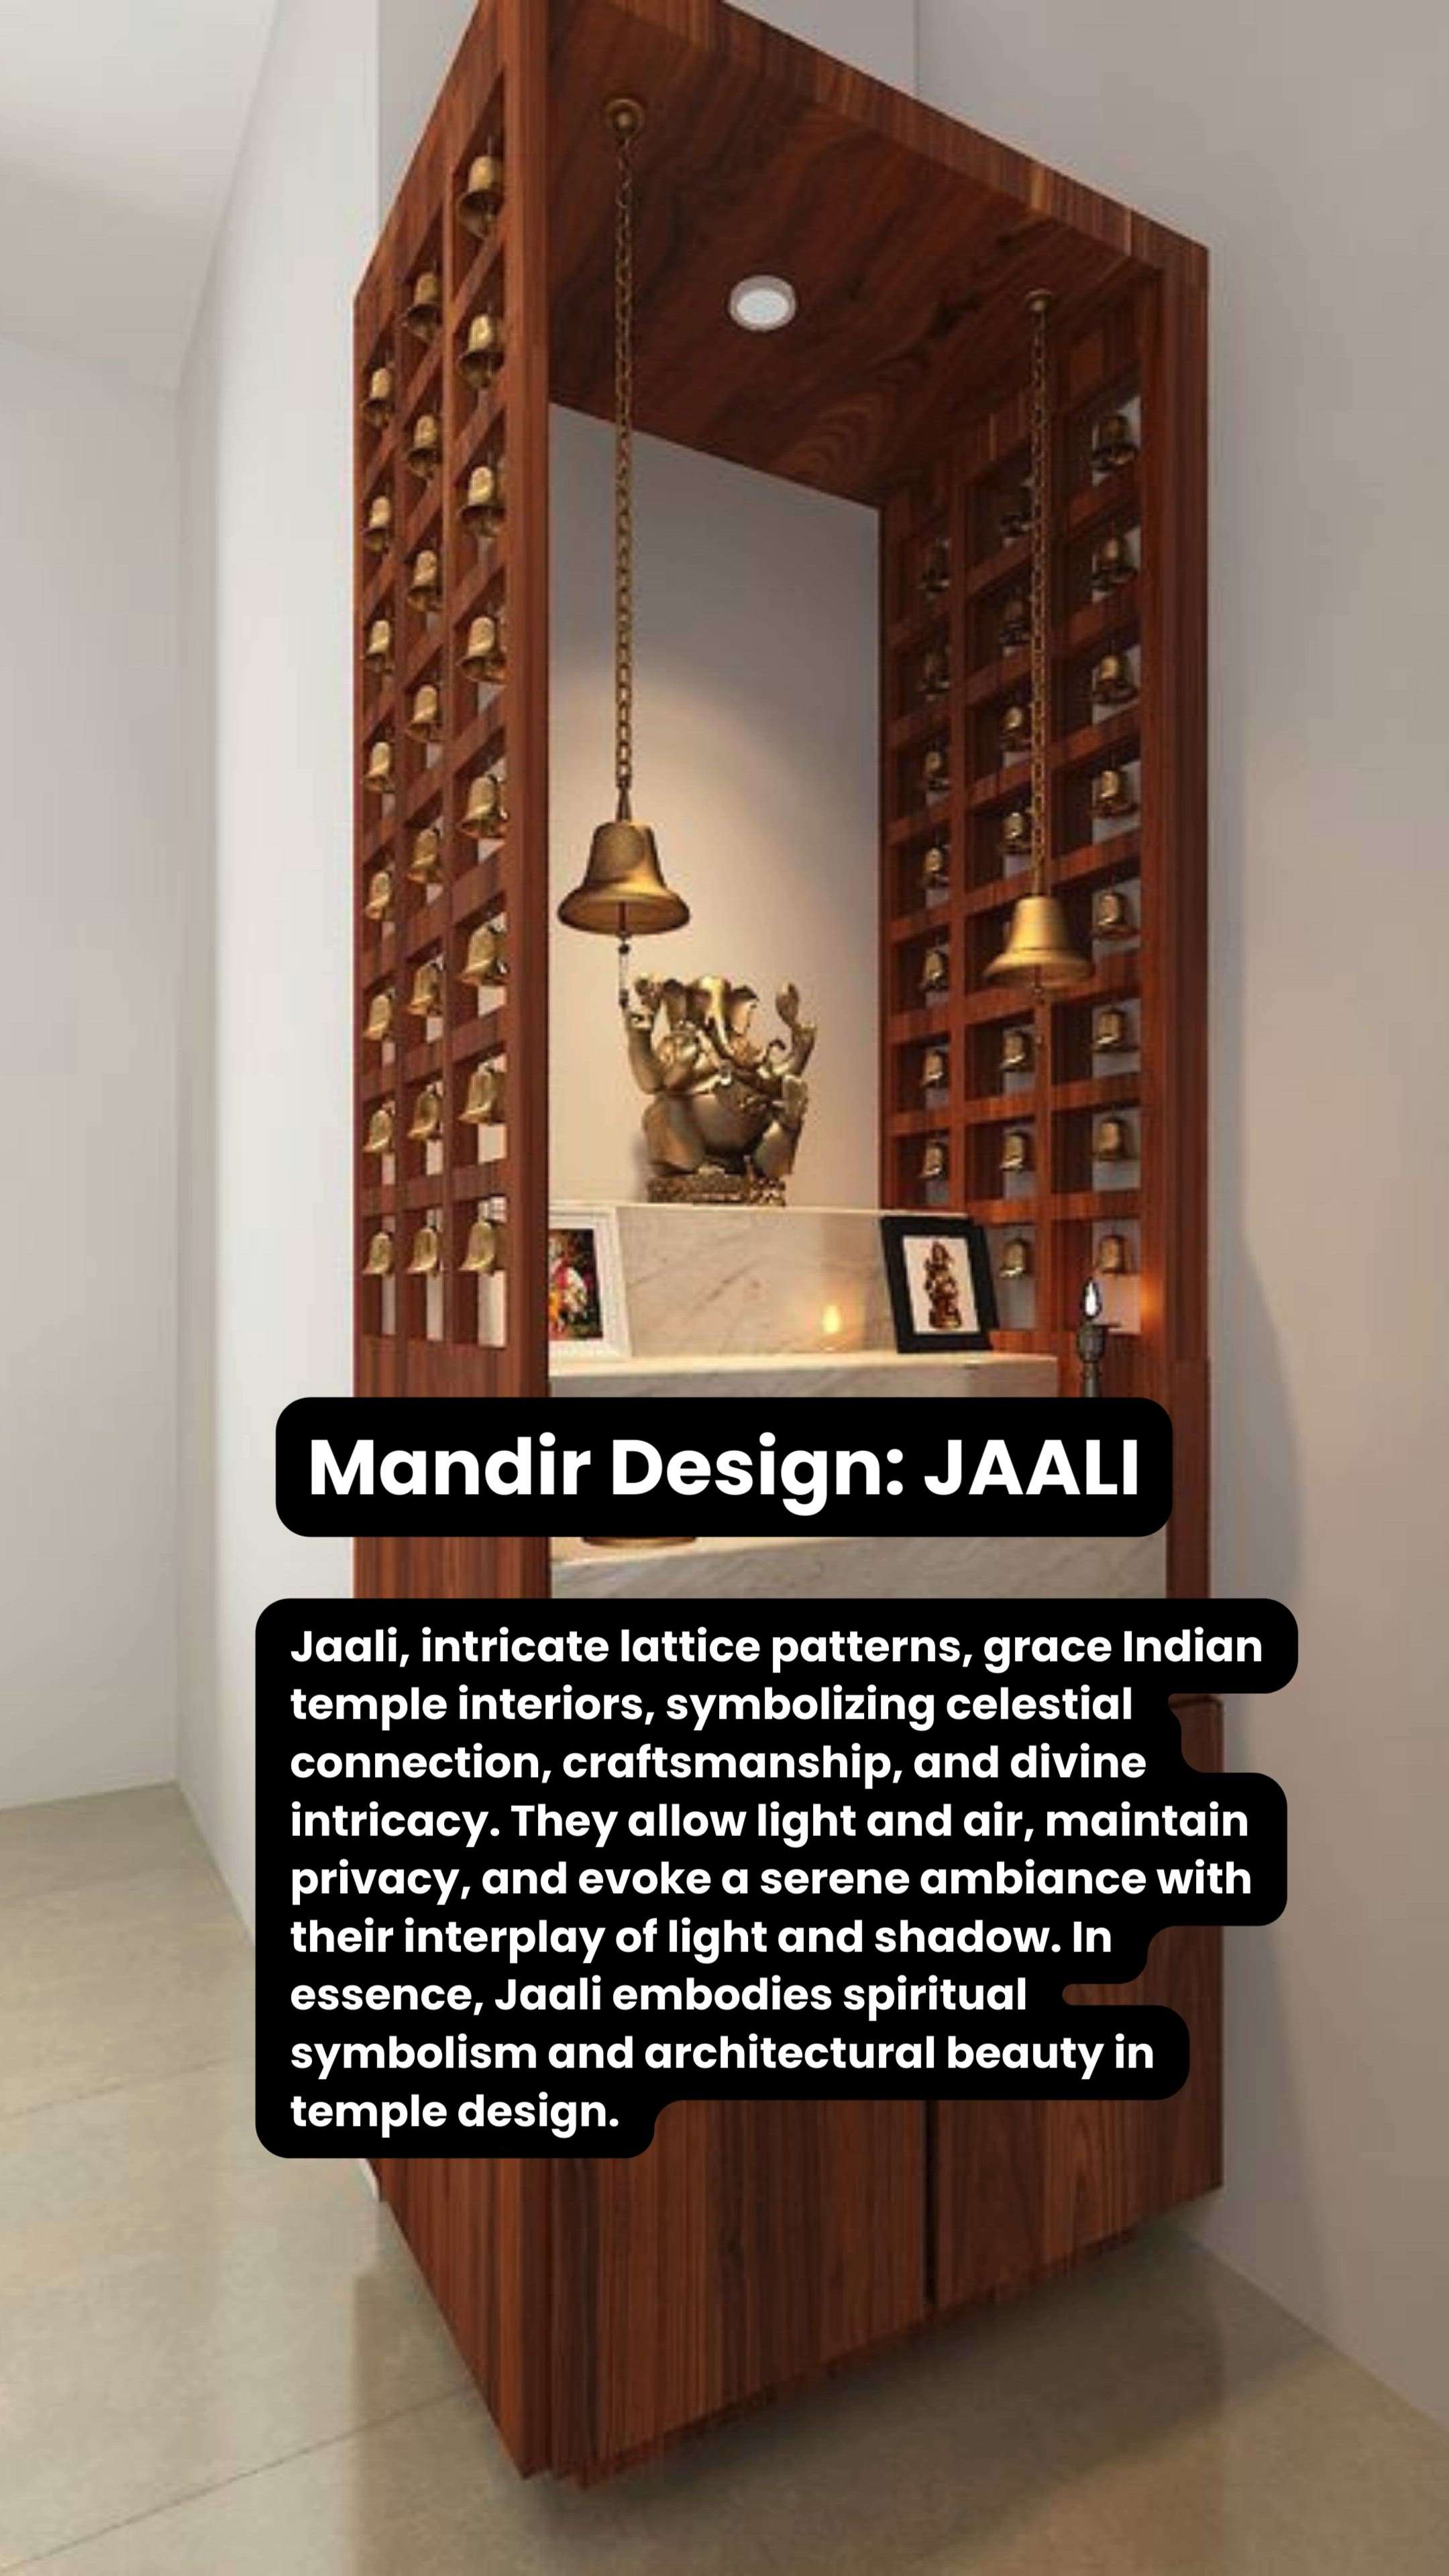 Mandir Design: JAALI

Jaali, intricate lattice patterns, grace Indian temple interiors, symbolizing celestial connection, craftsmanship, and divine intricacy. They allow light and air, maintain privacy, and evoke a serene ambiance with their interplay of light and shadow. In essence, Jaali embodies spiritual symbolism and architectural beauty in temple design.


#Poojaroom #InteriorDesigner #pooja #poojaroomdesign #poojaunit #poojaroomdecor #poojastand #poojadoor #poojaroomconcepts #poojaunitcumcrockery #poojaunitcnccutting #poojaunitdesig#poojaunit #creatorsofkolo #musthave #home #kitchenideas #modernhomes #ideas #essentials